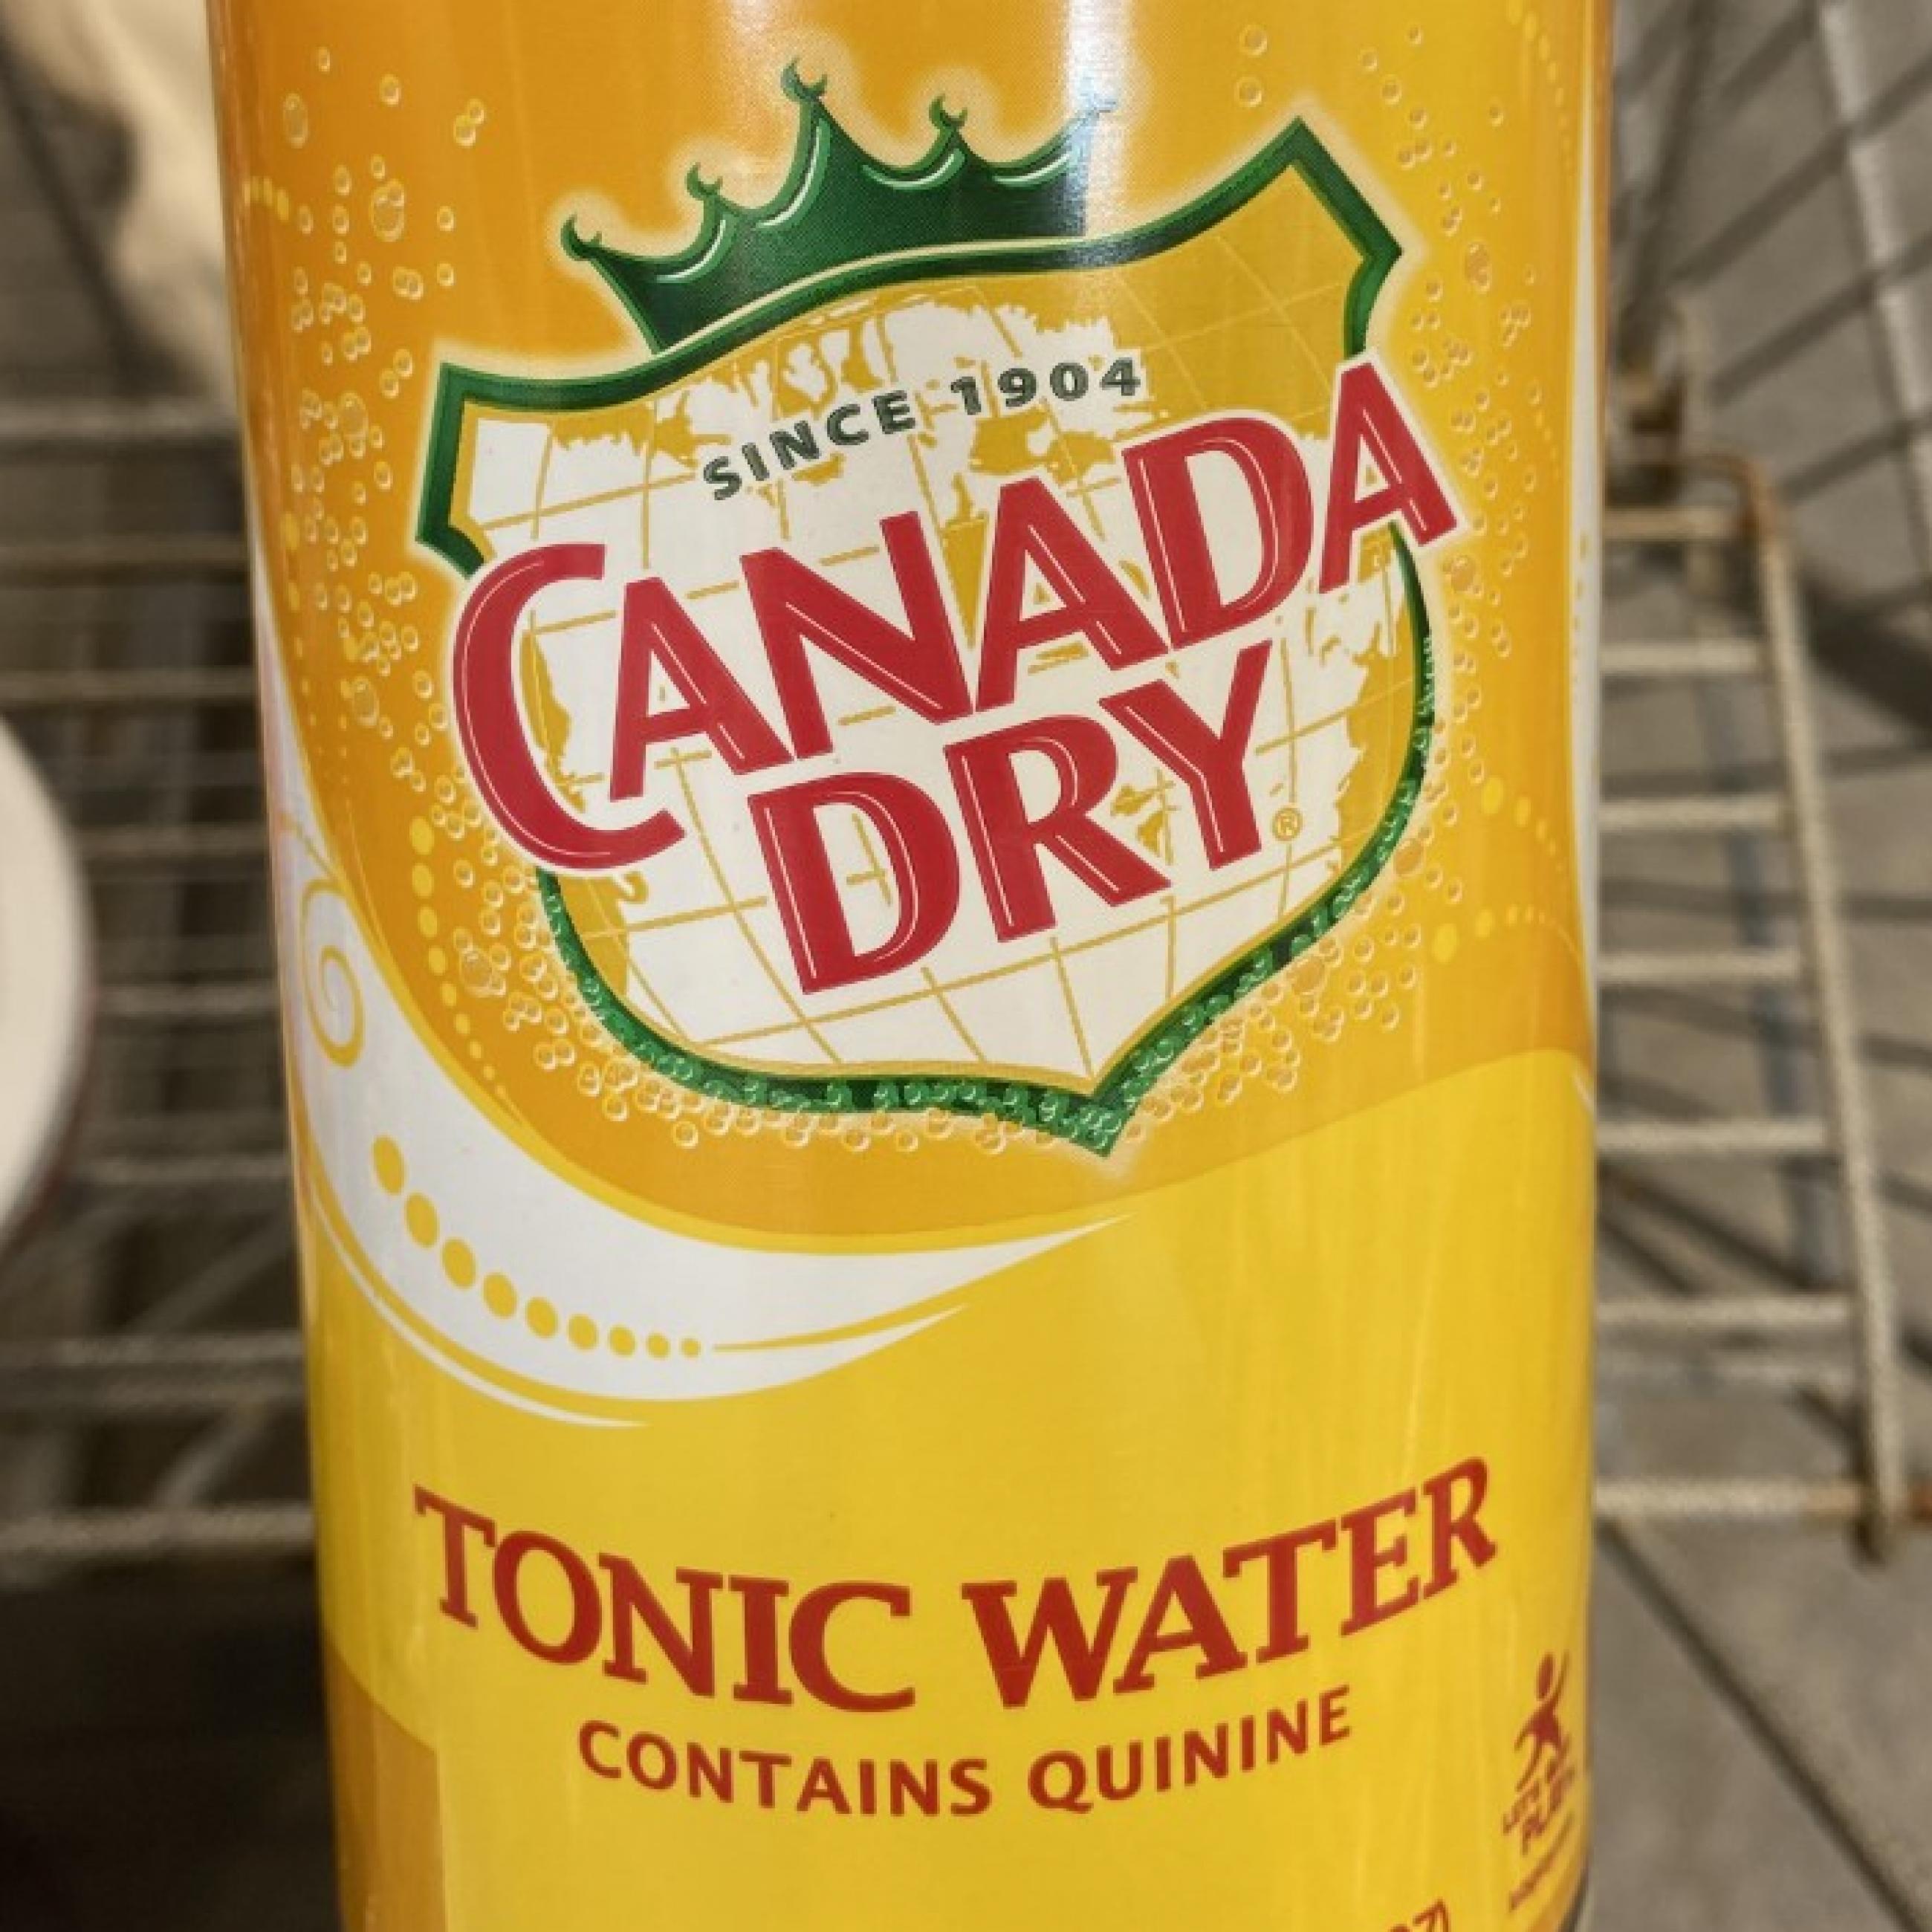 A bottle of Canada Dry Tonic Water